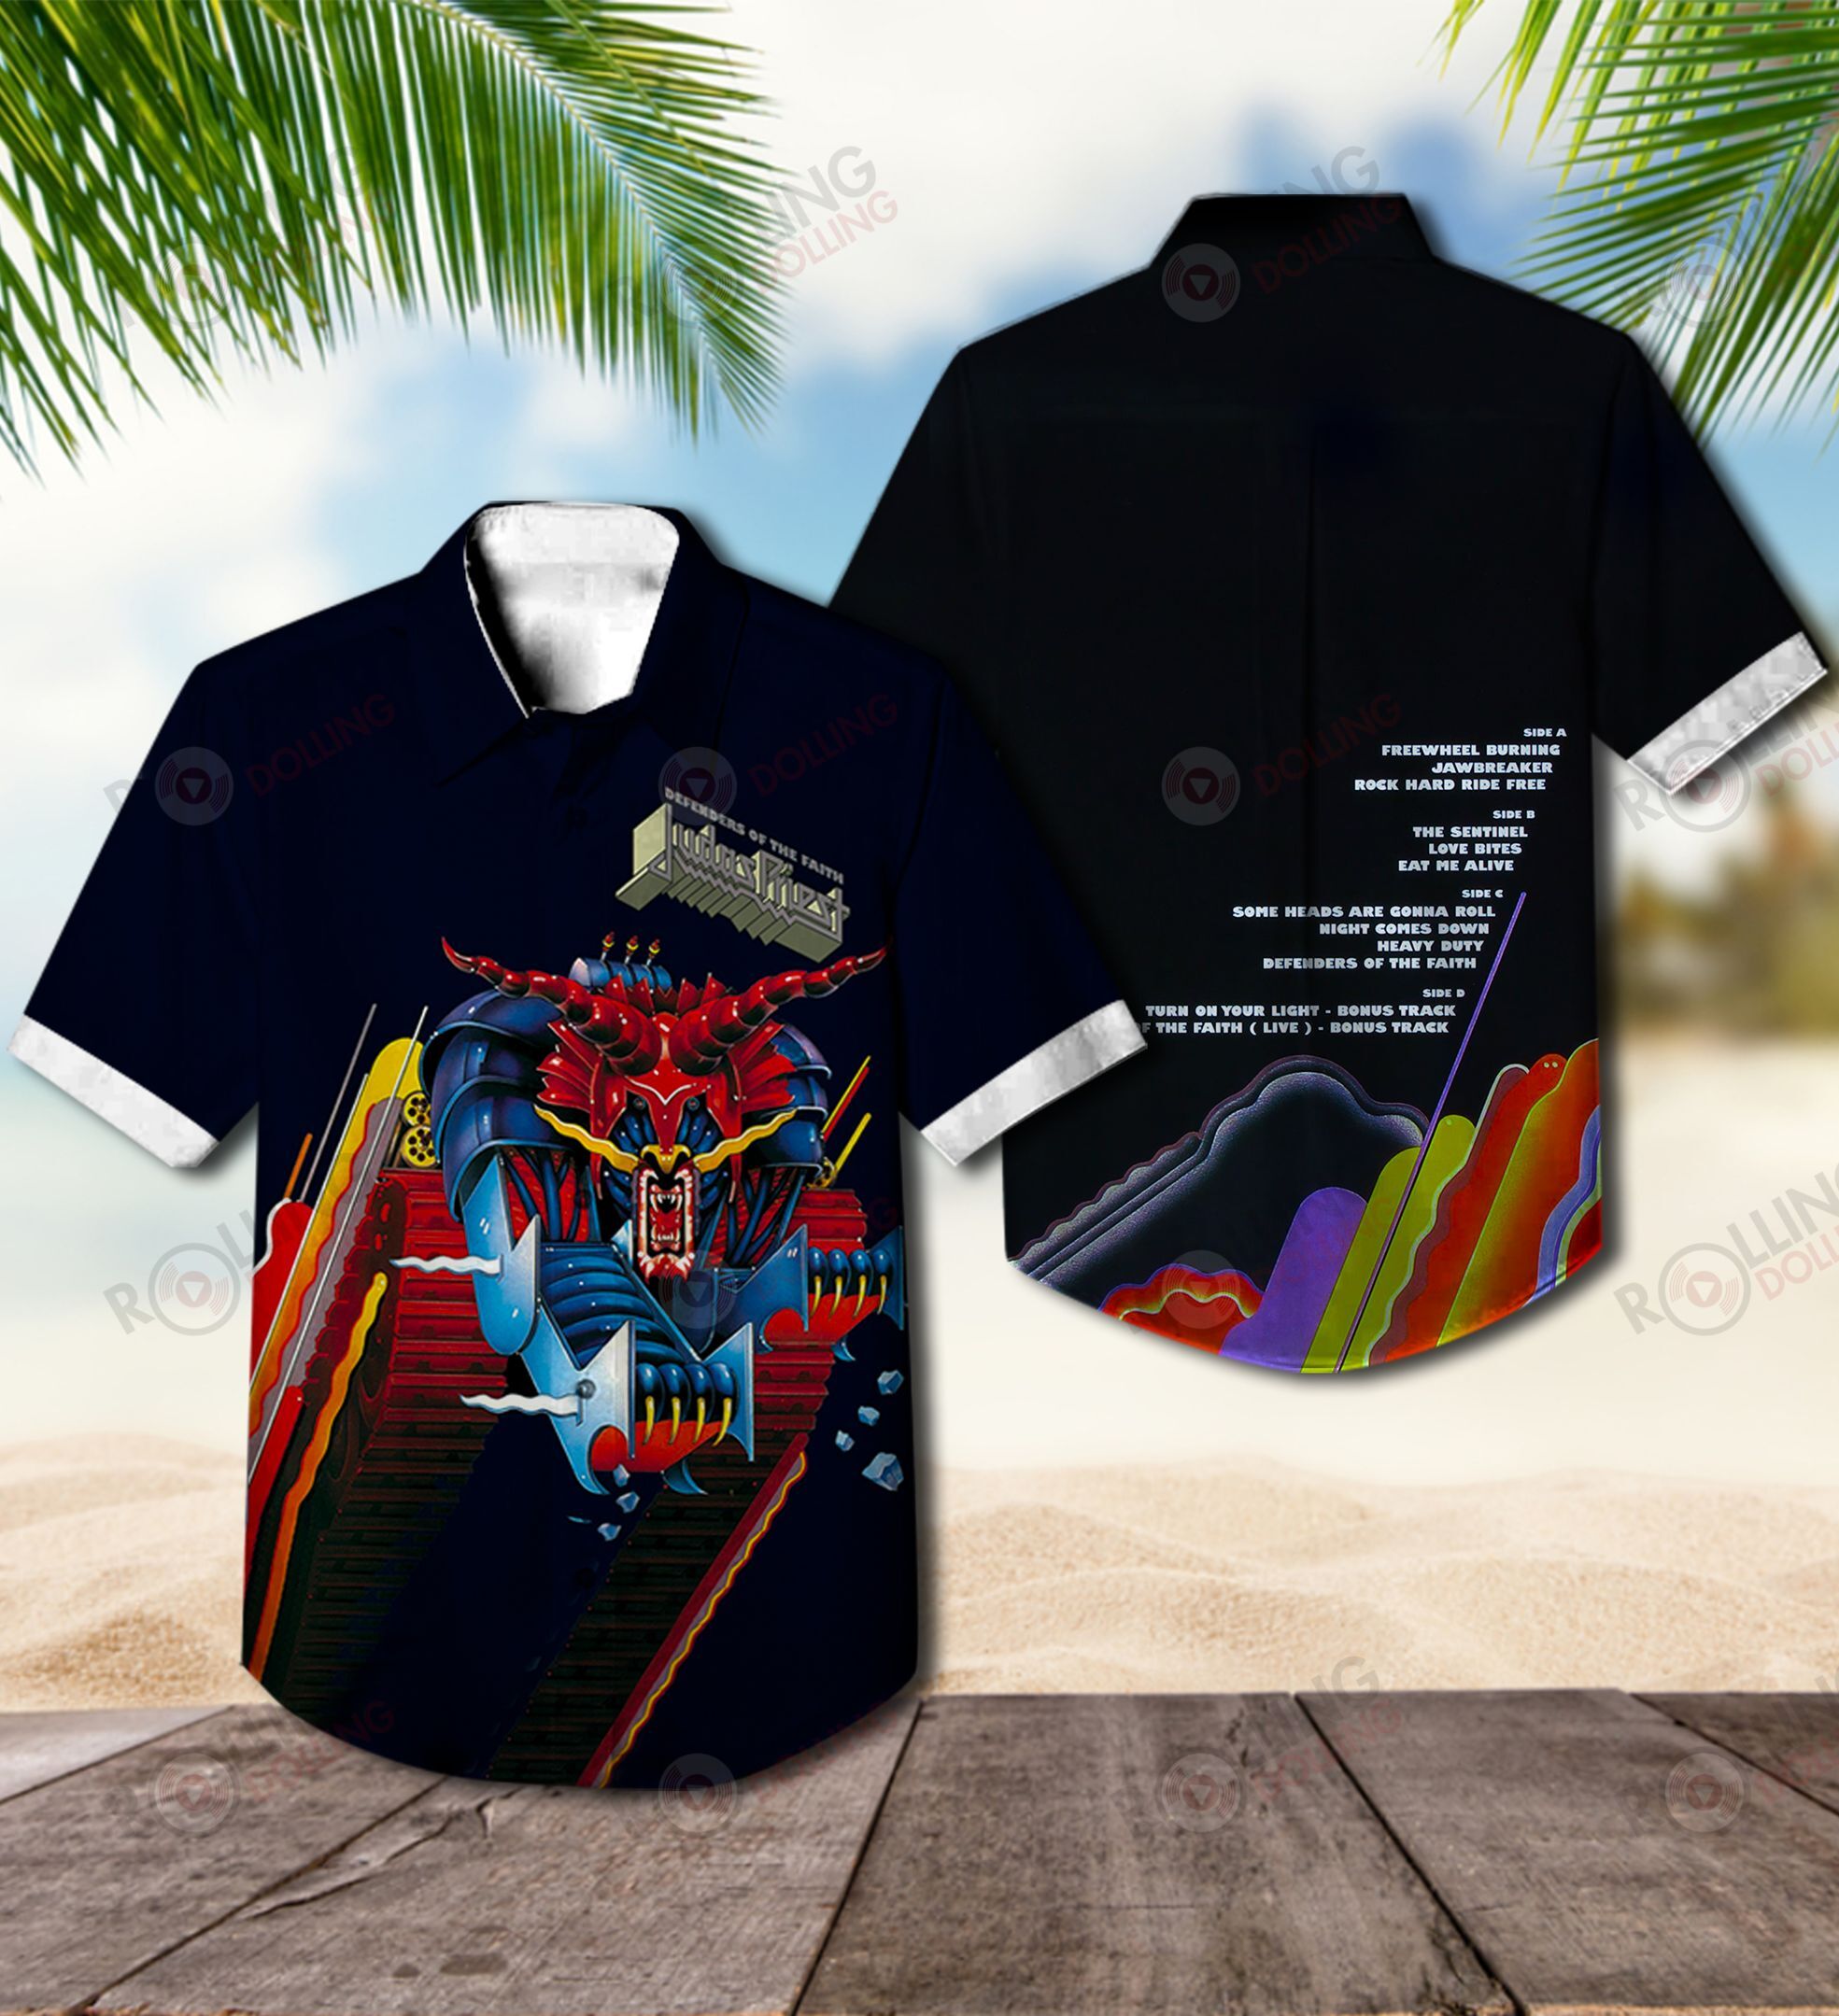 Check out these top 100+ Hawaiian shirt so cool for rock fans 217